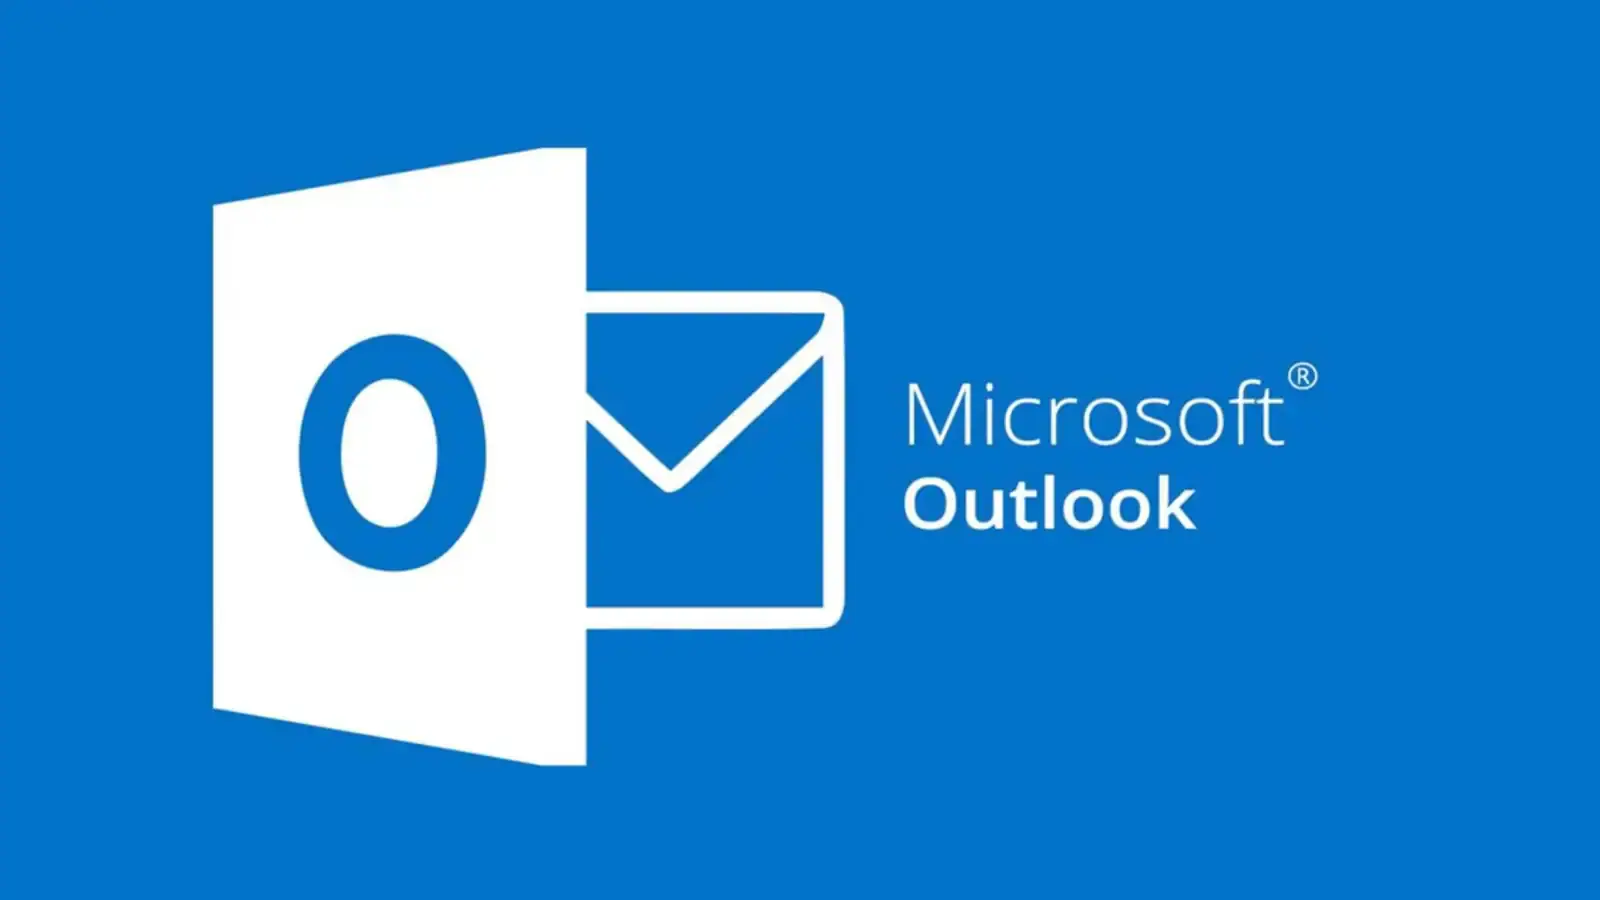 Microsoft Outlook: Company released a new version of the app, many useful features have come